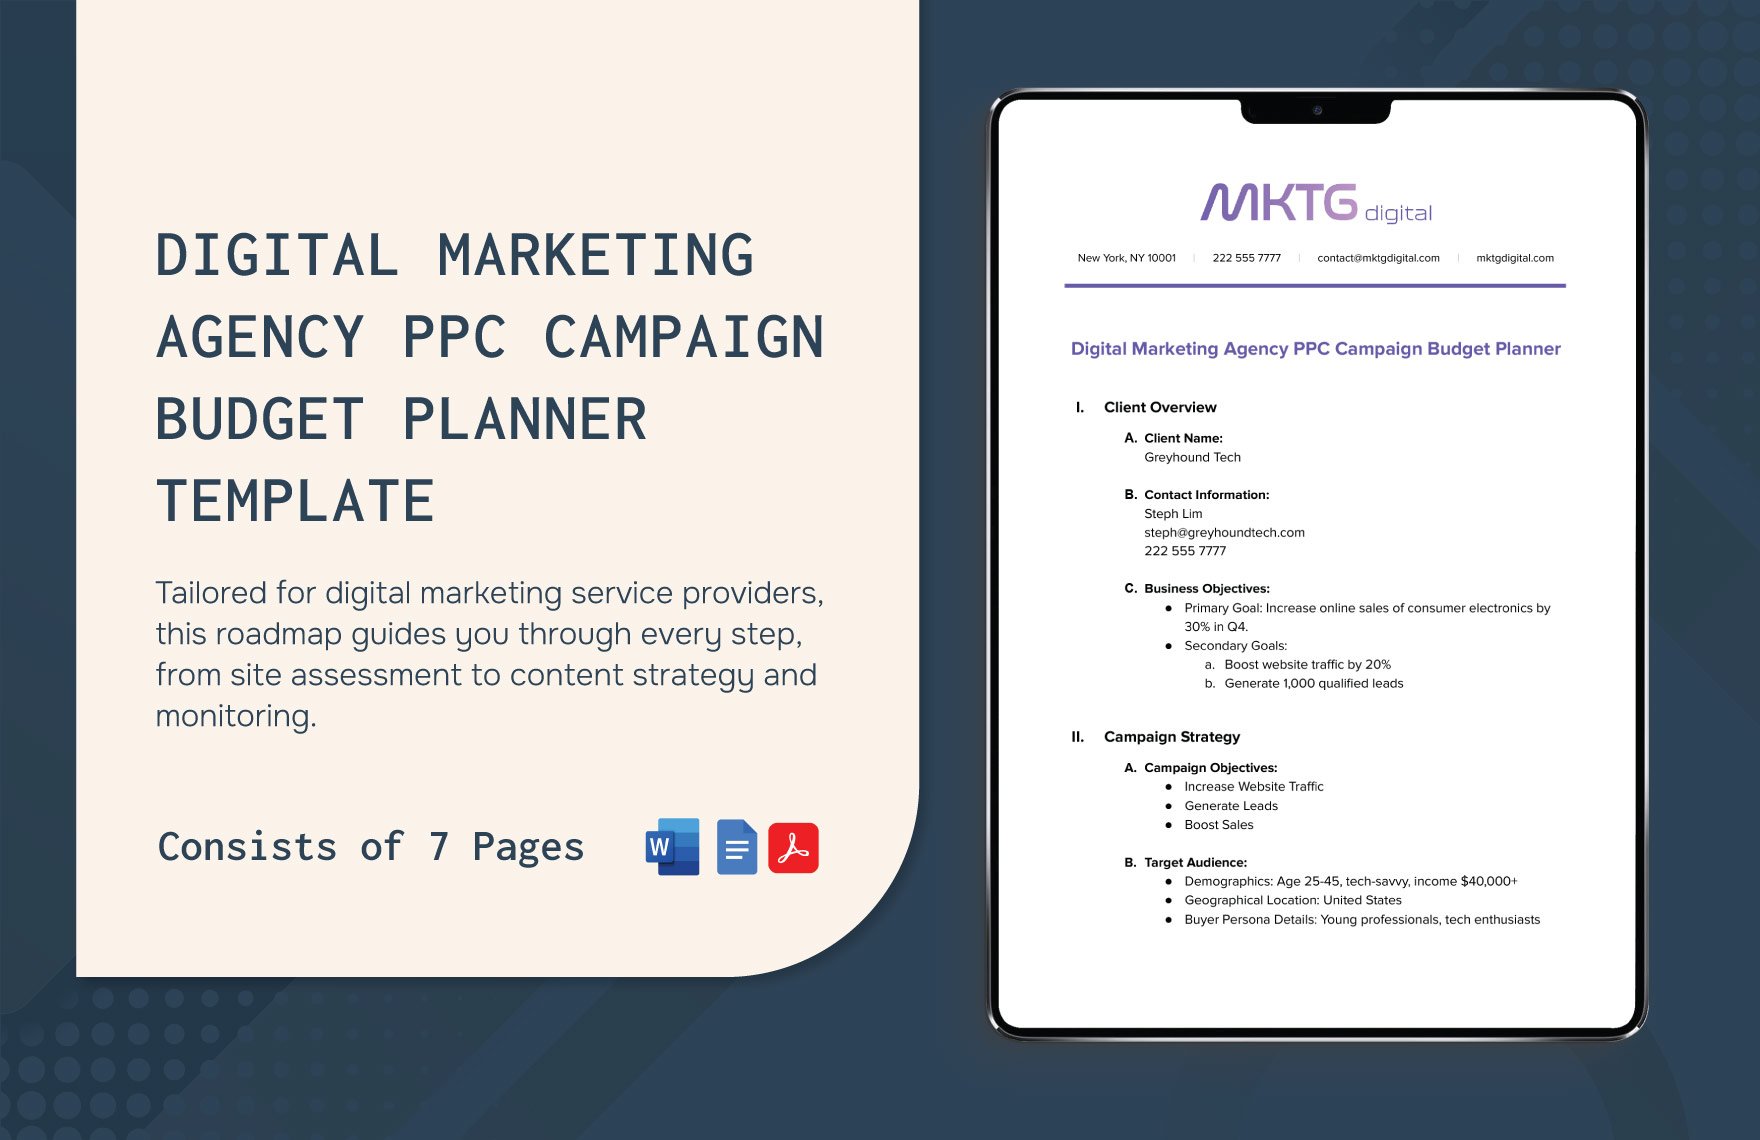 Digital Marketing Agency PPC Campaign Budget Planner Template